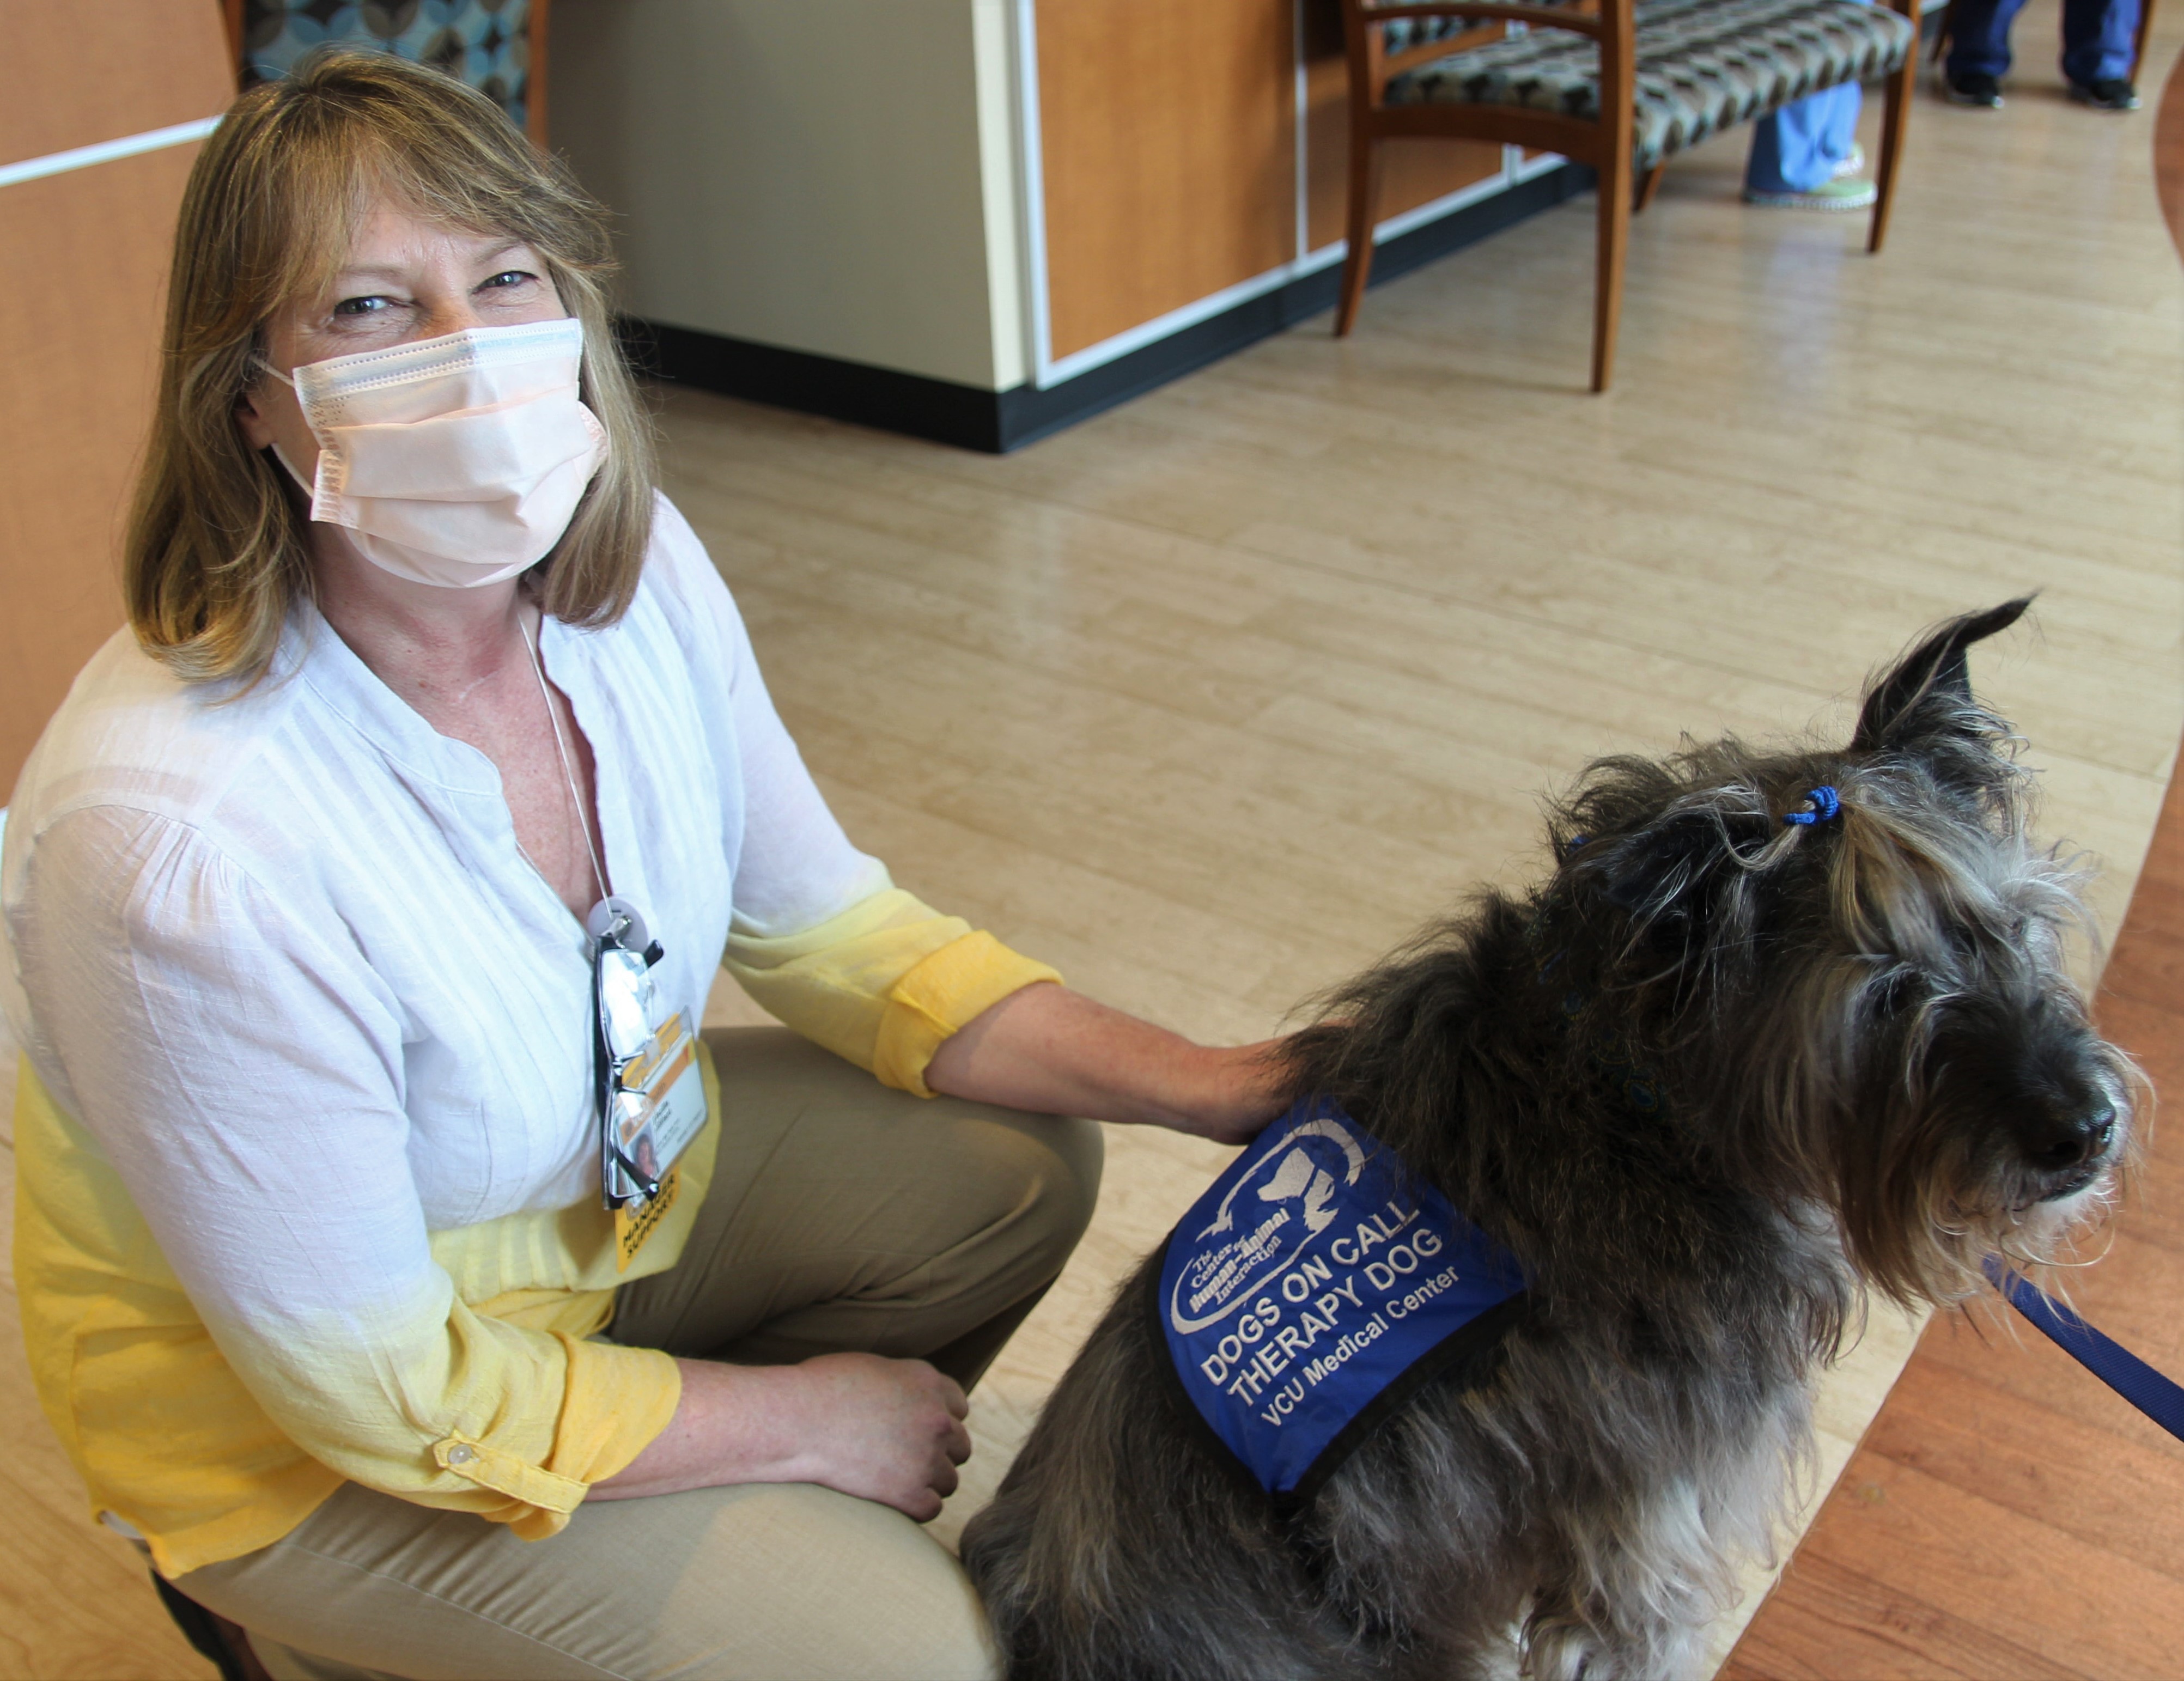 terrier mix therapy dog Zeke with VCU Health worker in hallway